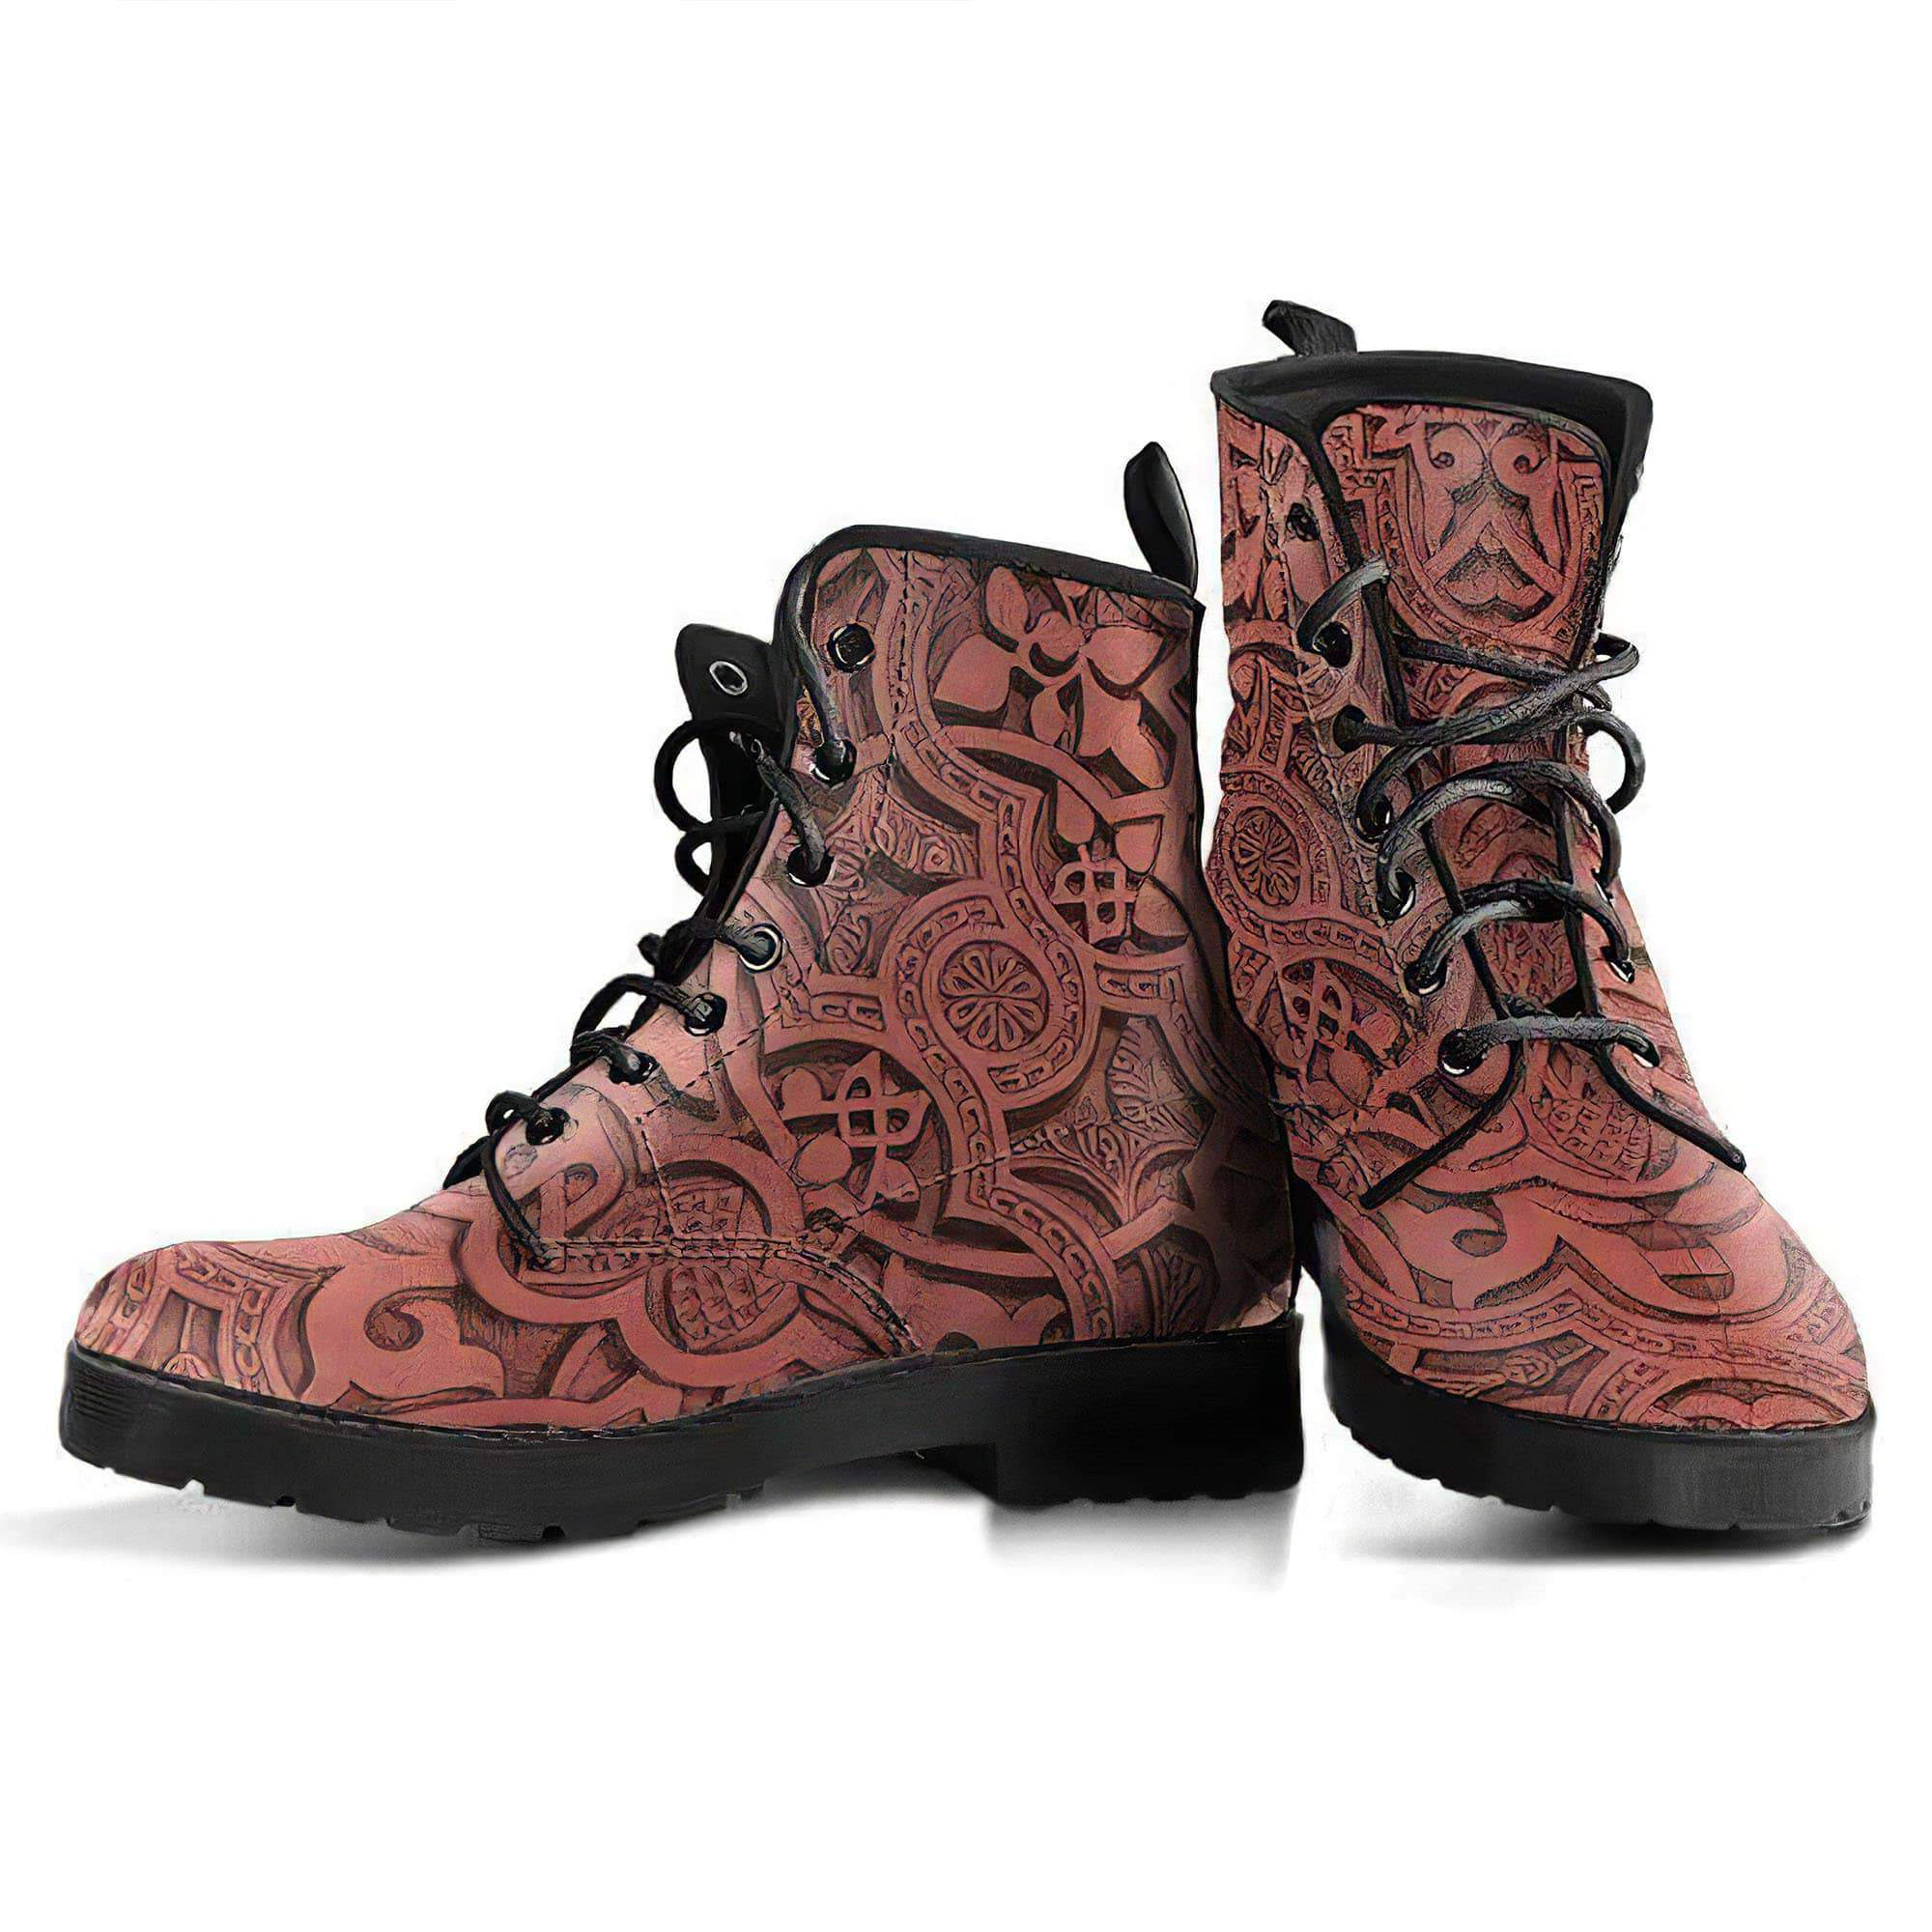 vintage-mandala-ceilings-in-coral-tree-leather-boots-for-women-women-s-leather-boots-12051971244093.jpg